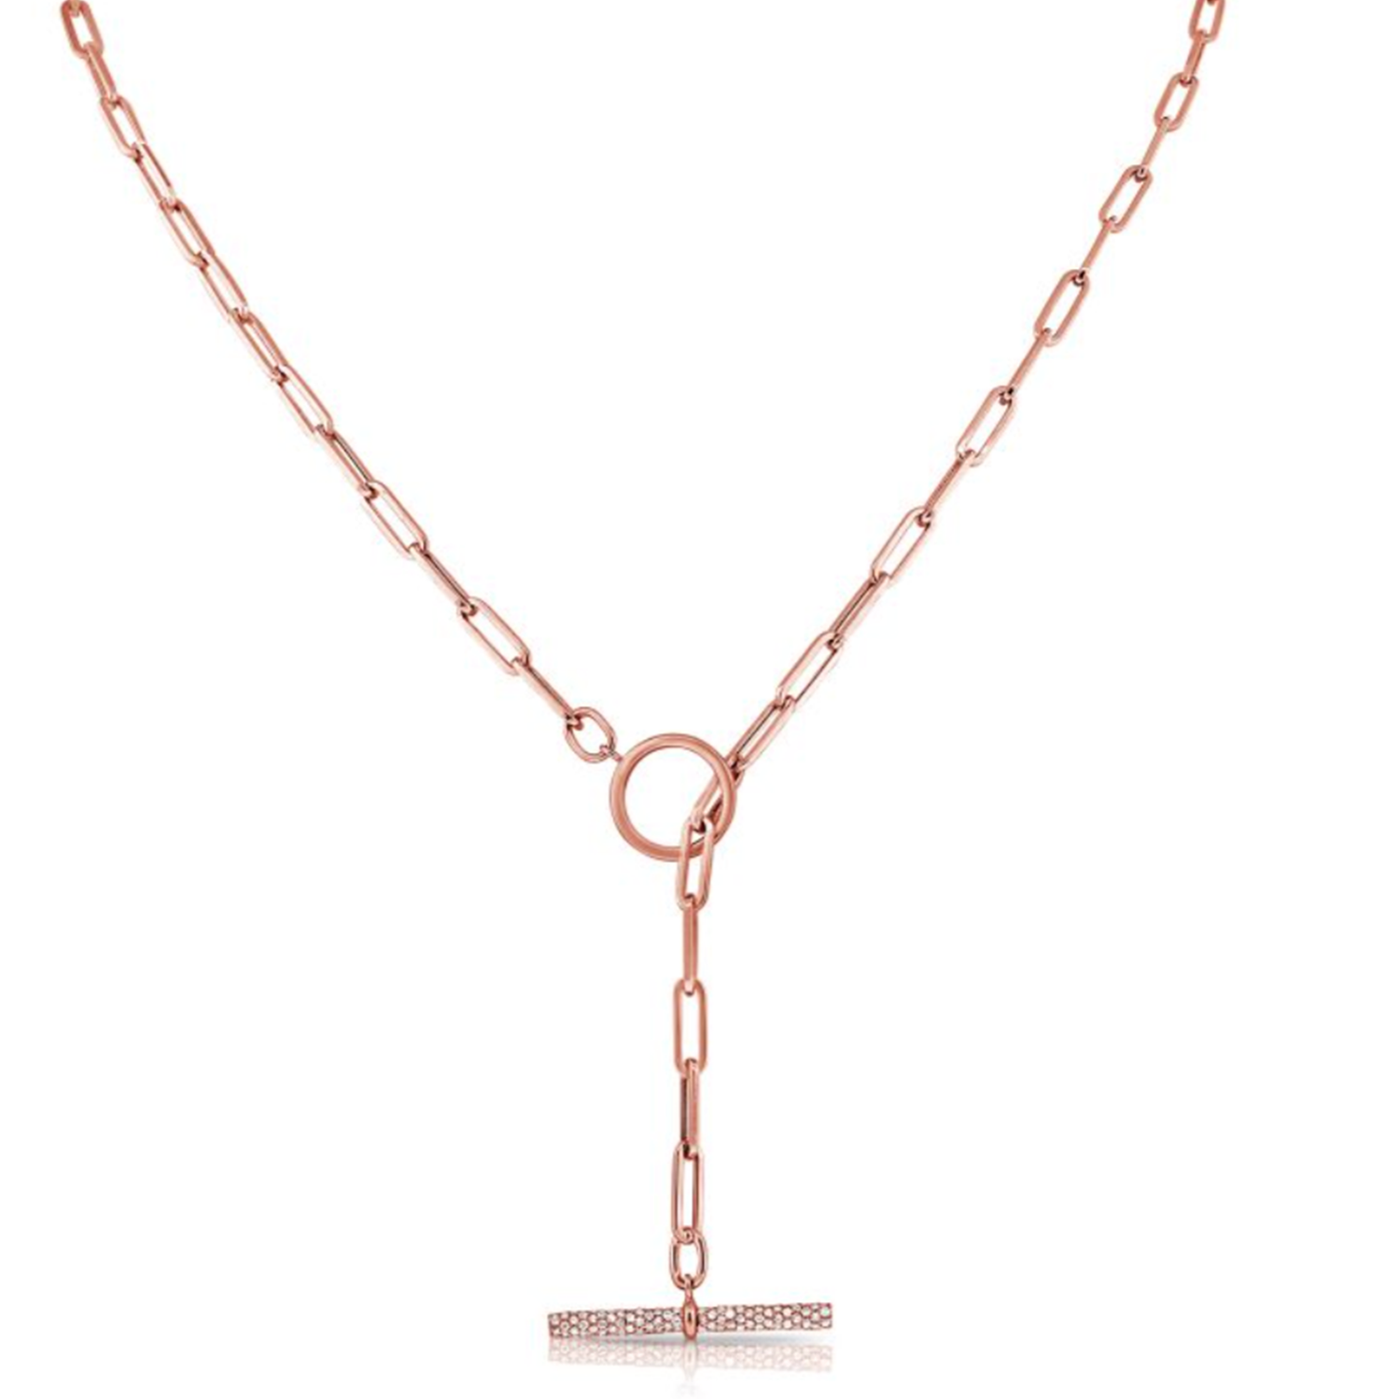 Links Lariat Necklace